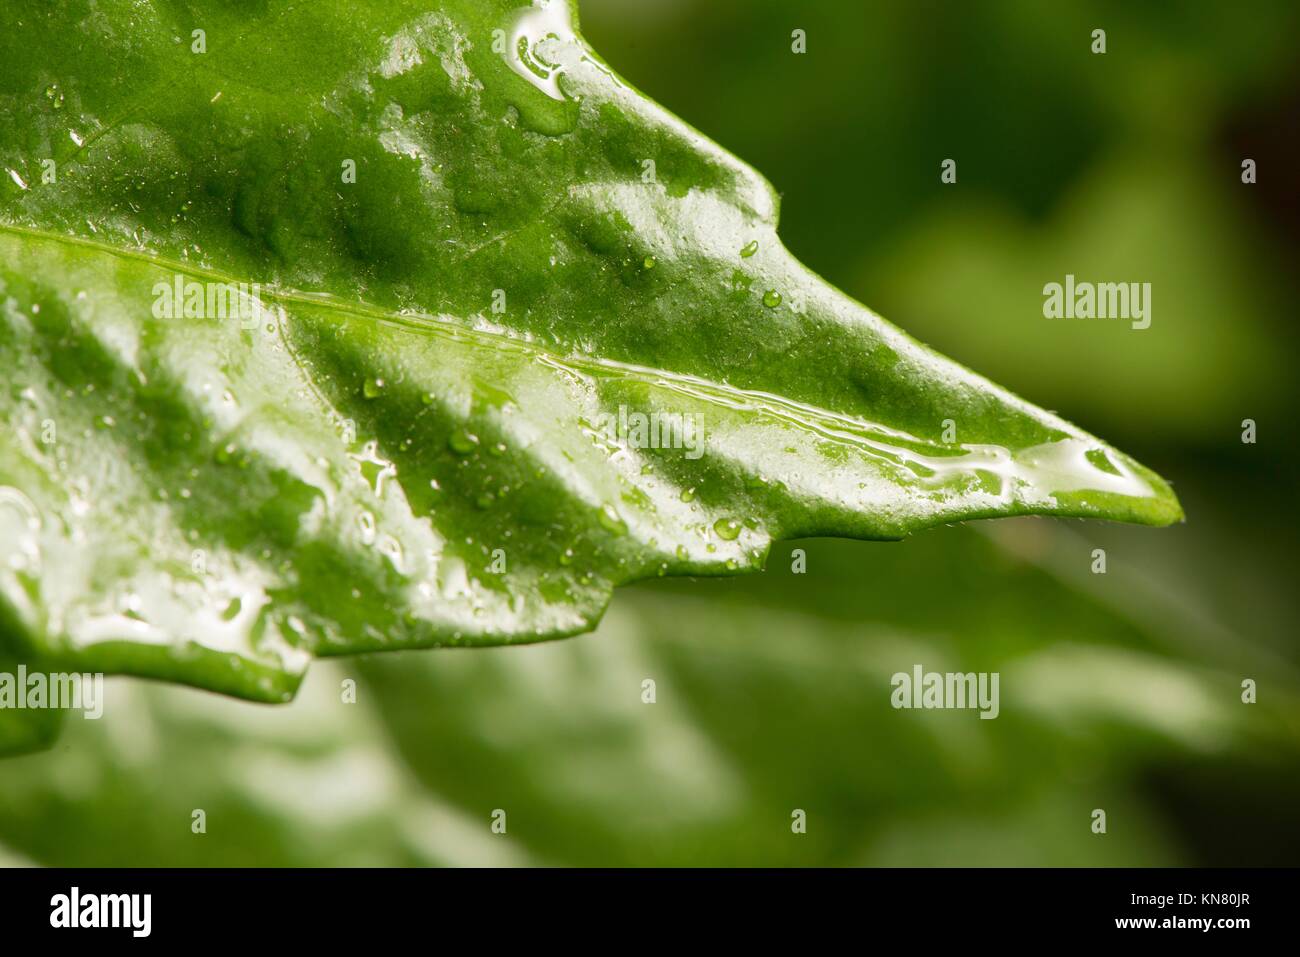 Nature detail of fresh green hibiscus leaf with water drops. Concept of freshness, growth and eco awareness. Stock Photo